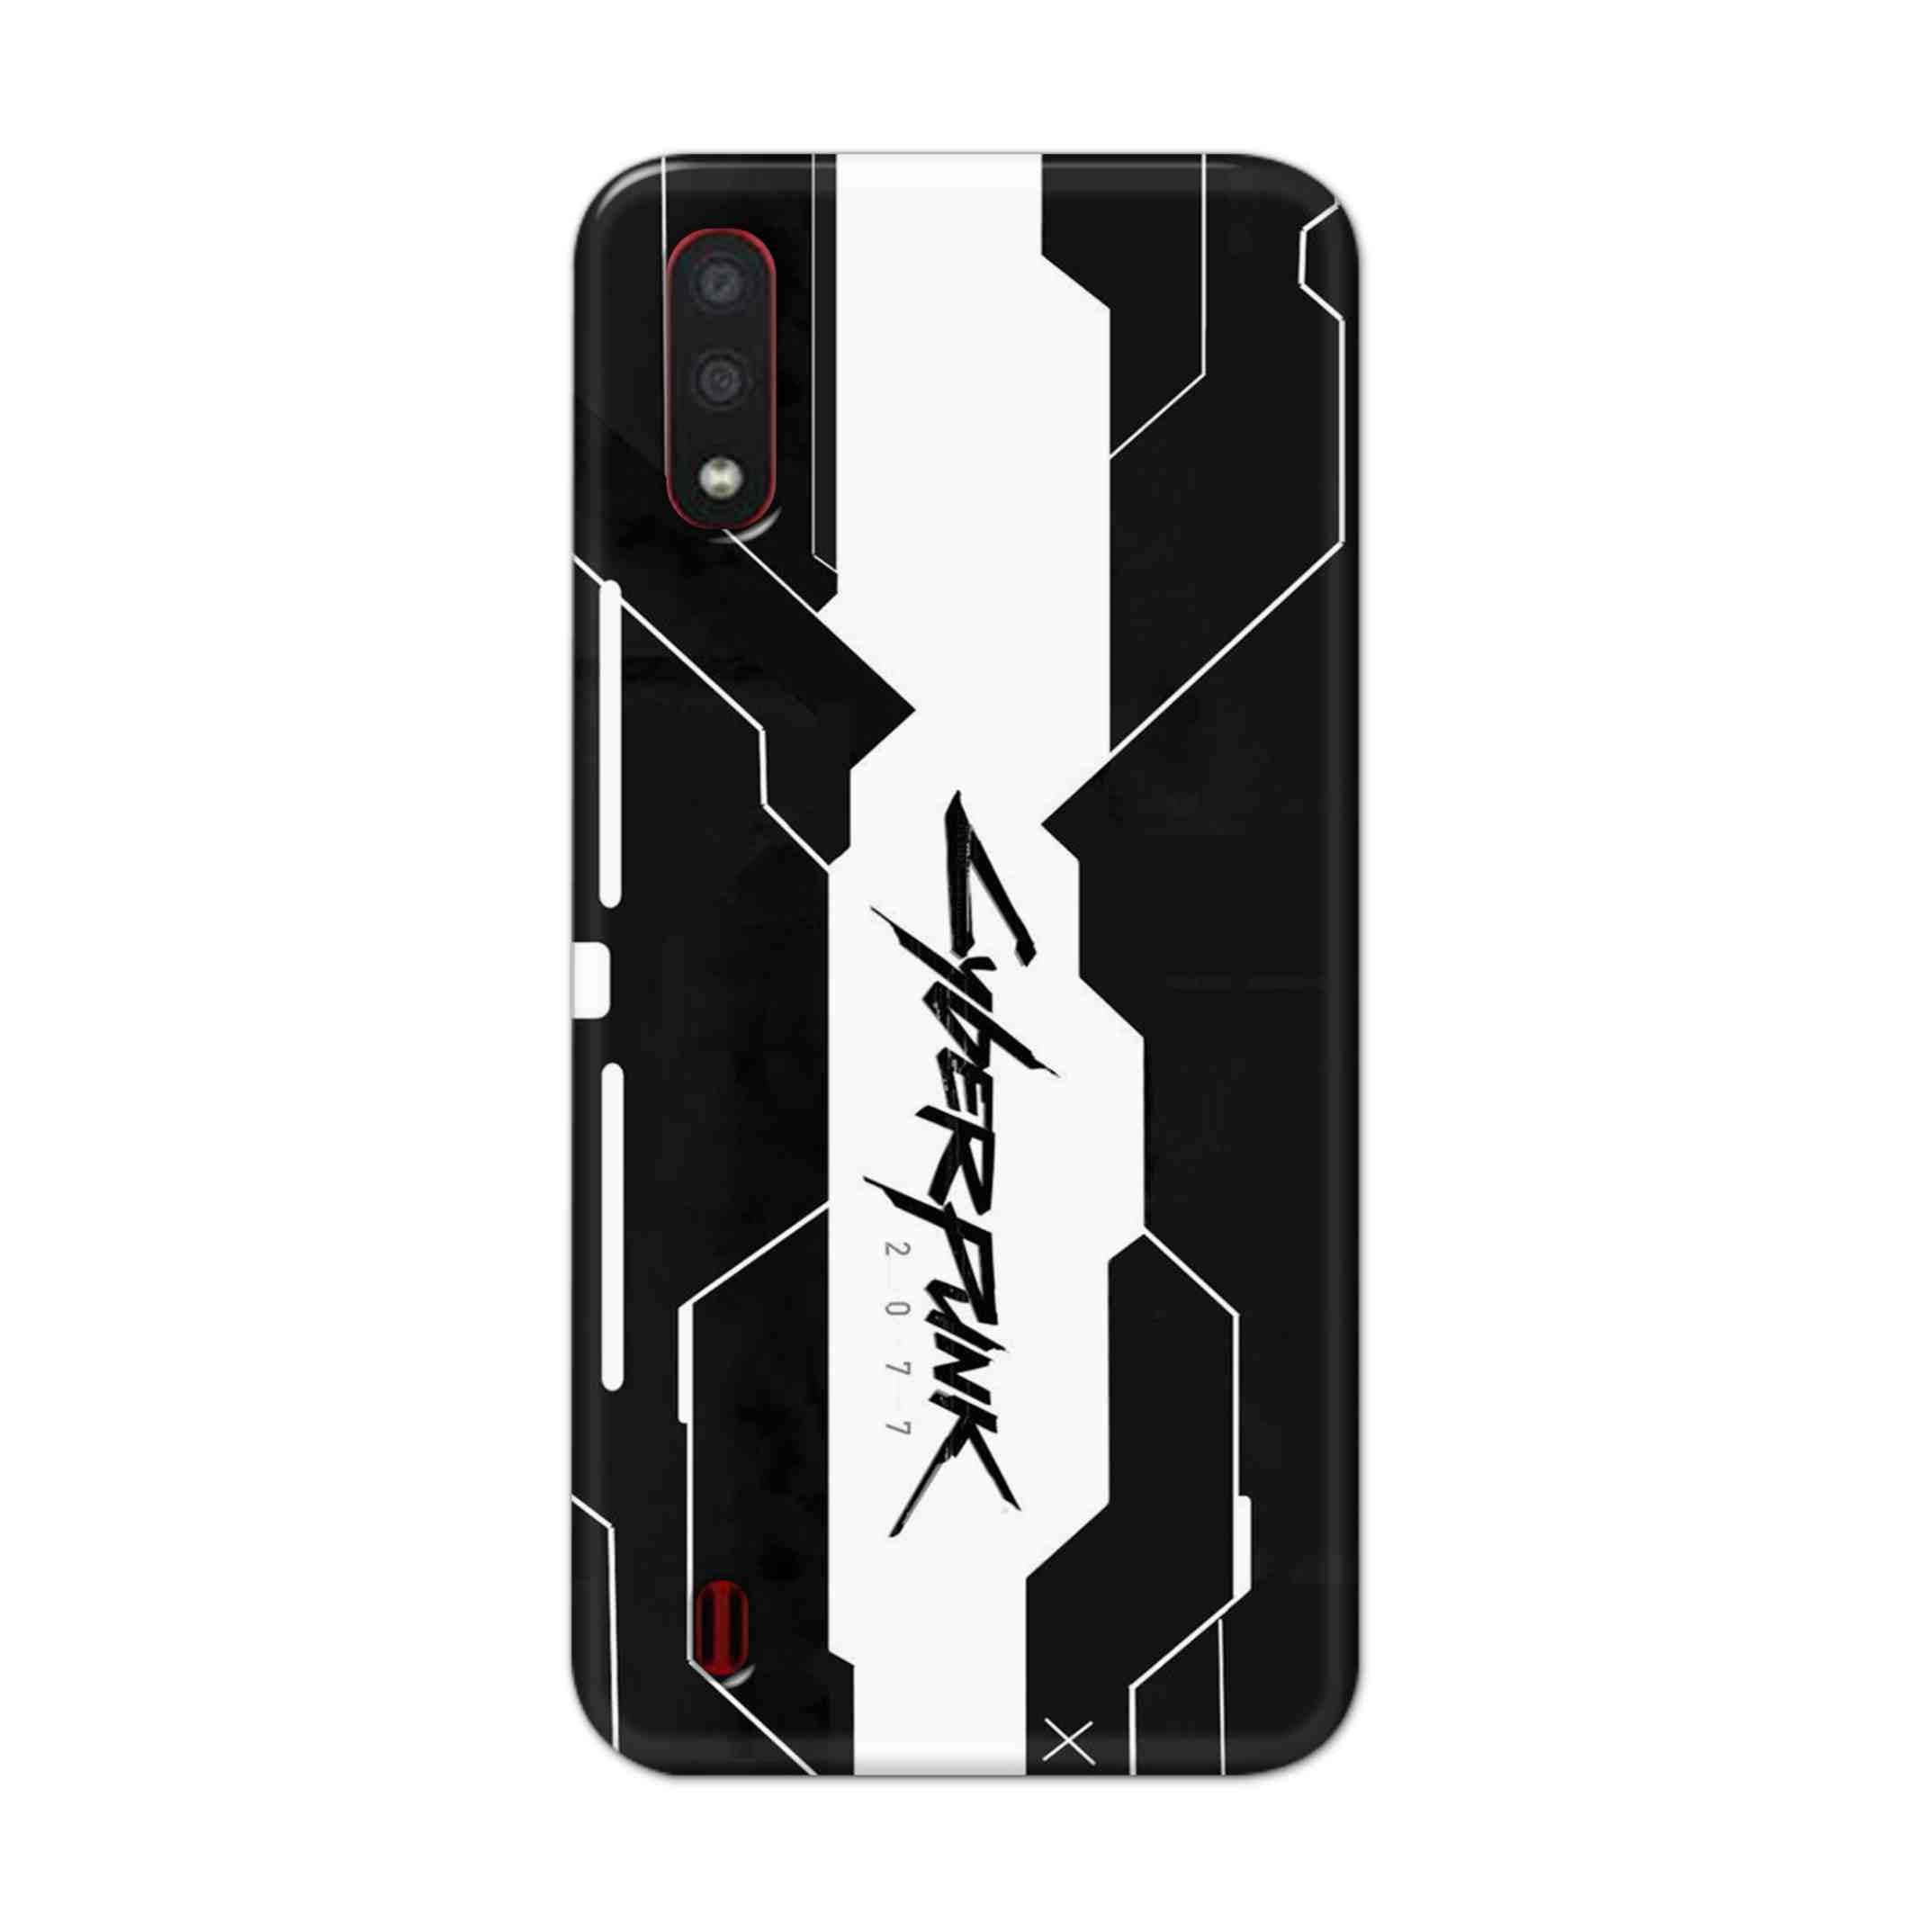 Buy Cyberpunk 2077 Art Hard Back Mobile Phone Case/Cover For Samsung Galaxy M01 Online